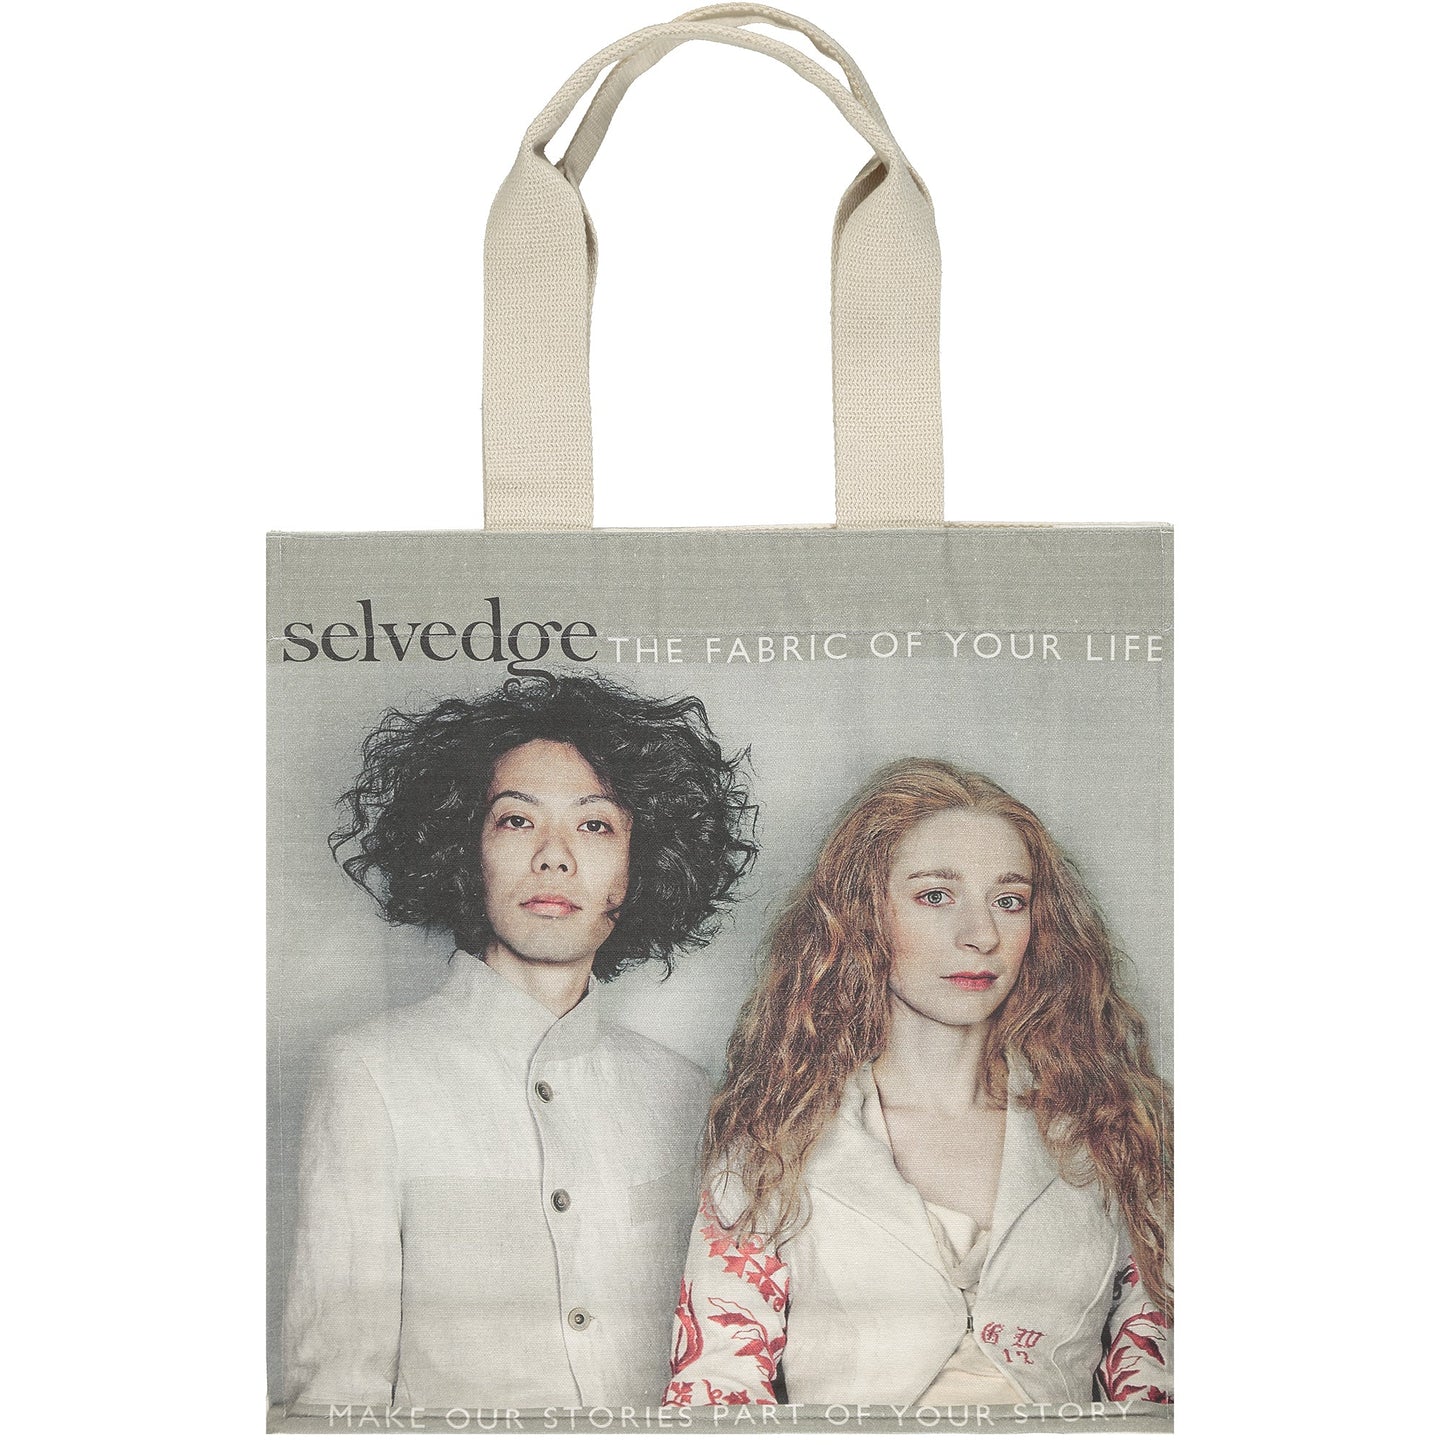 Free gift for new subscribers: The Selvedge Tote